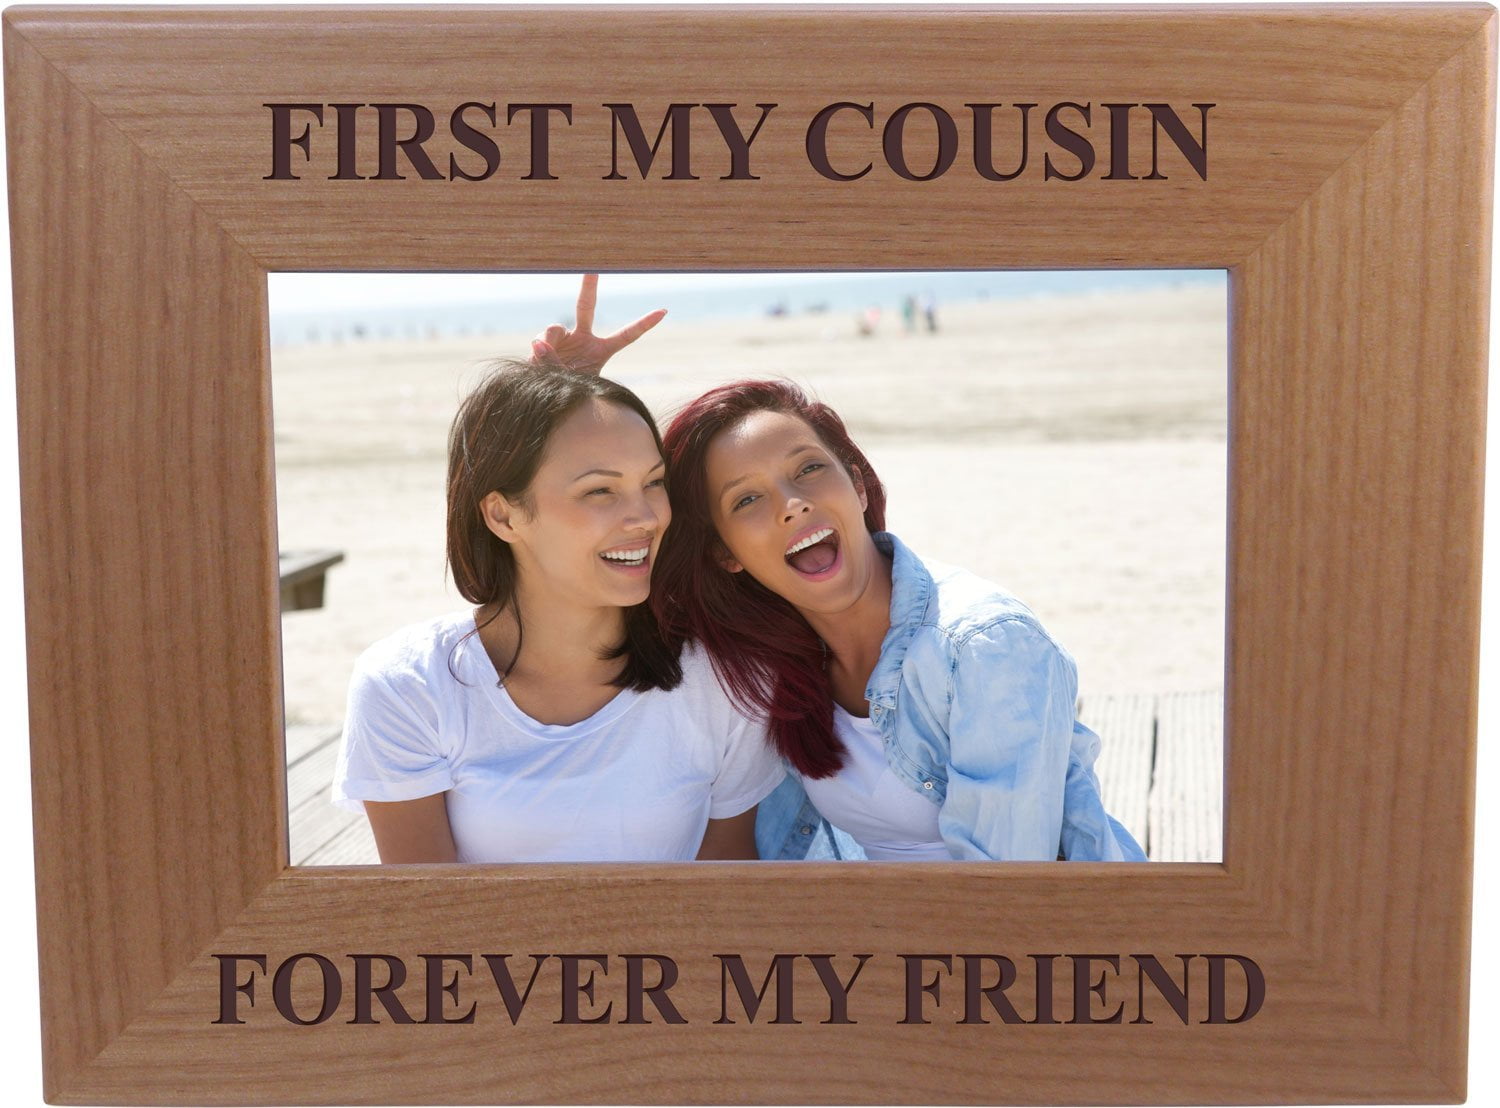 Friend Gift Birthday Gift Best Friend Gift Birthday Frame Gift for Friend Vintage Birthday Engraved 4x6 Picture Frame Wood Frame